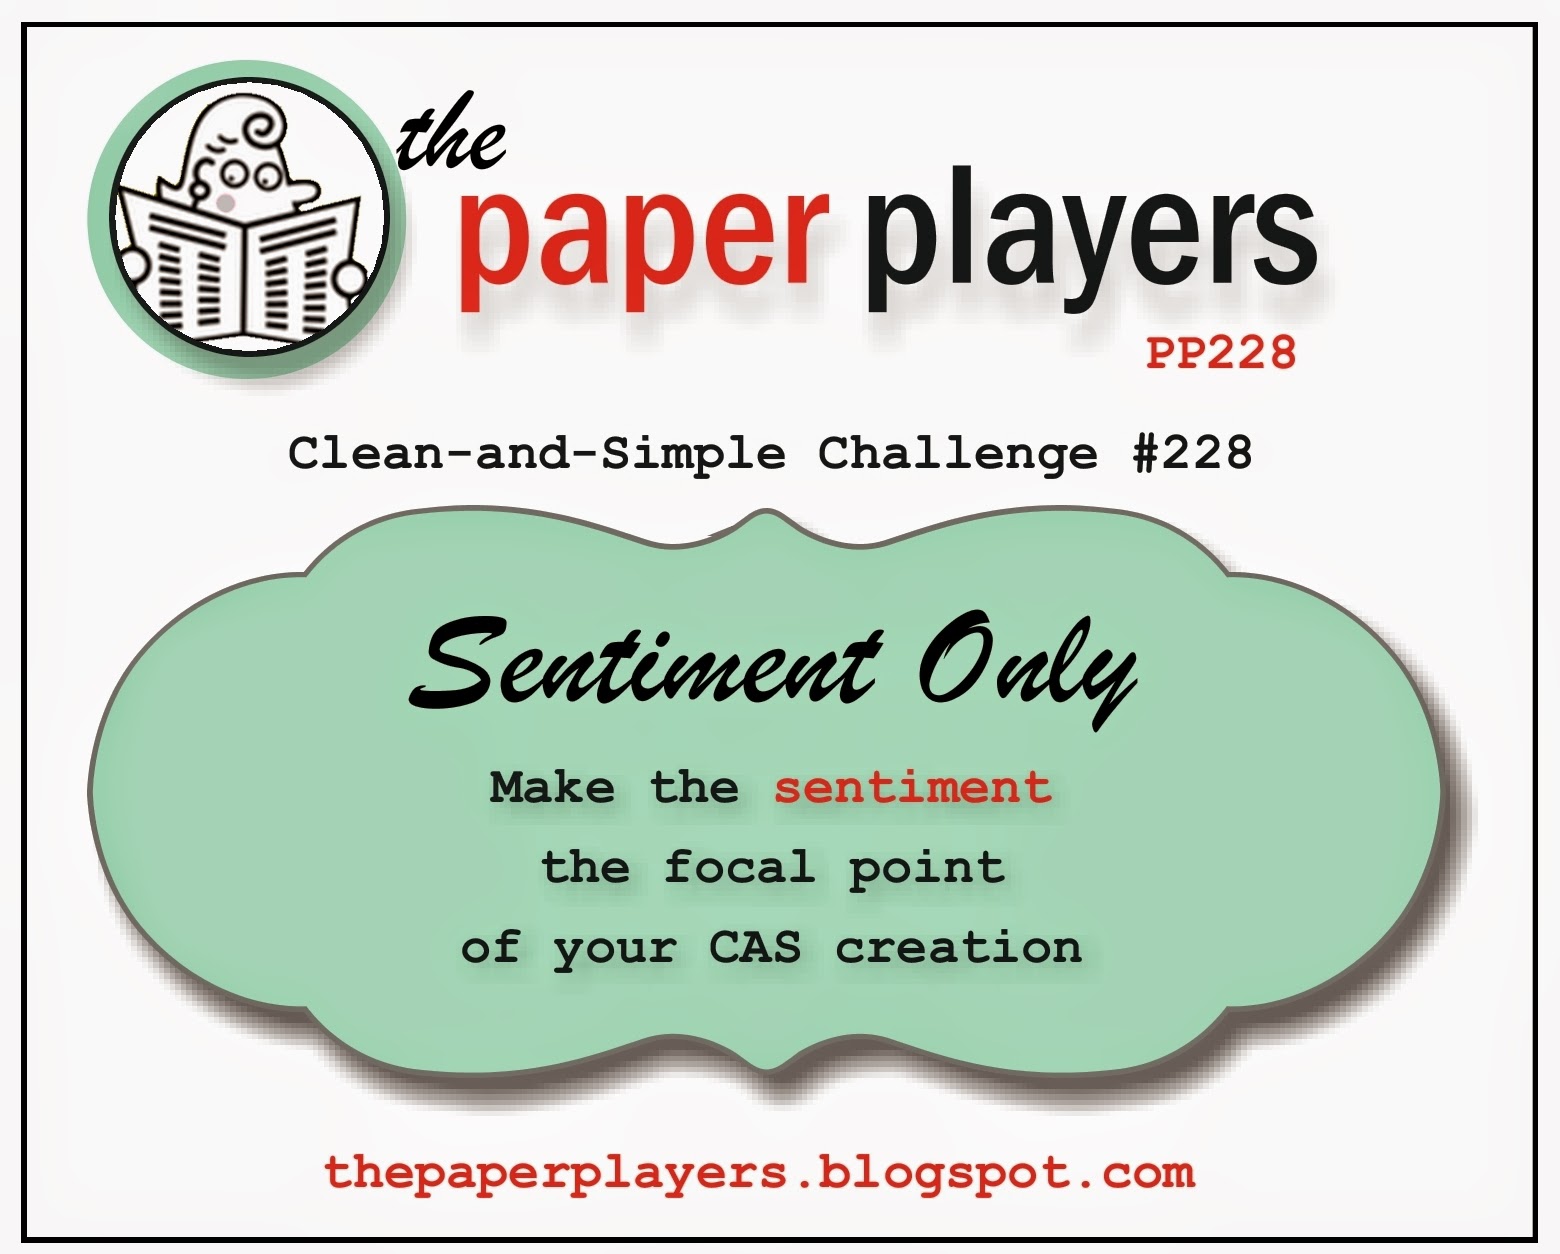 Playing paper. CAS Cards Challenge. Simple clean.